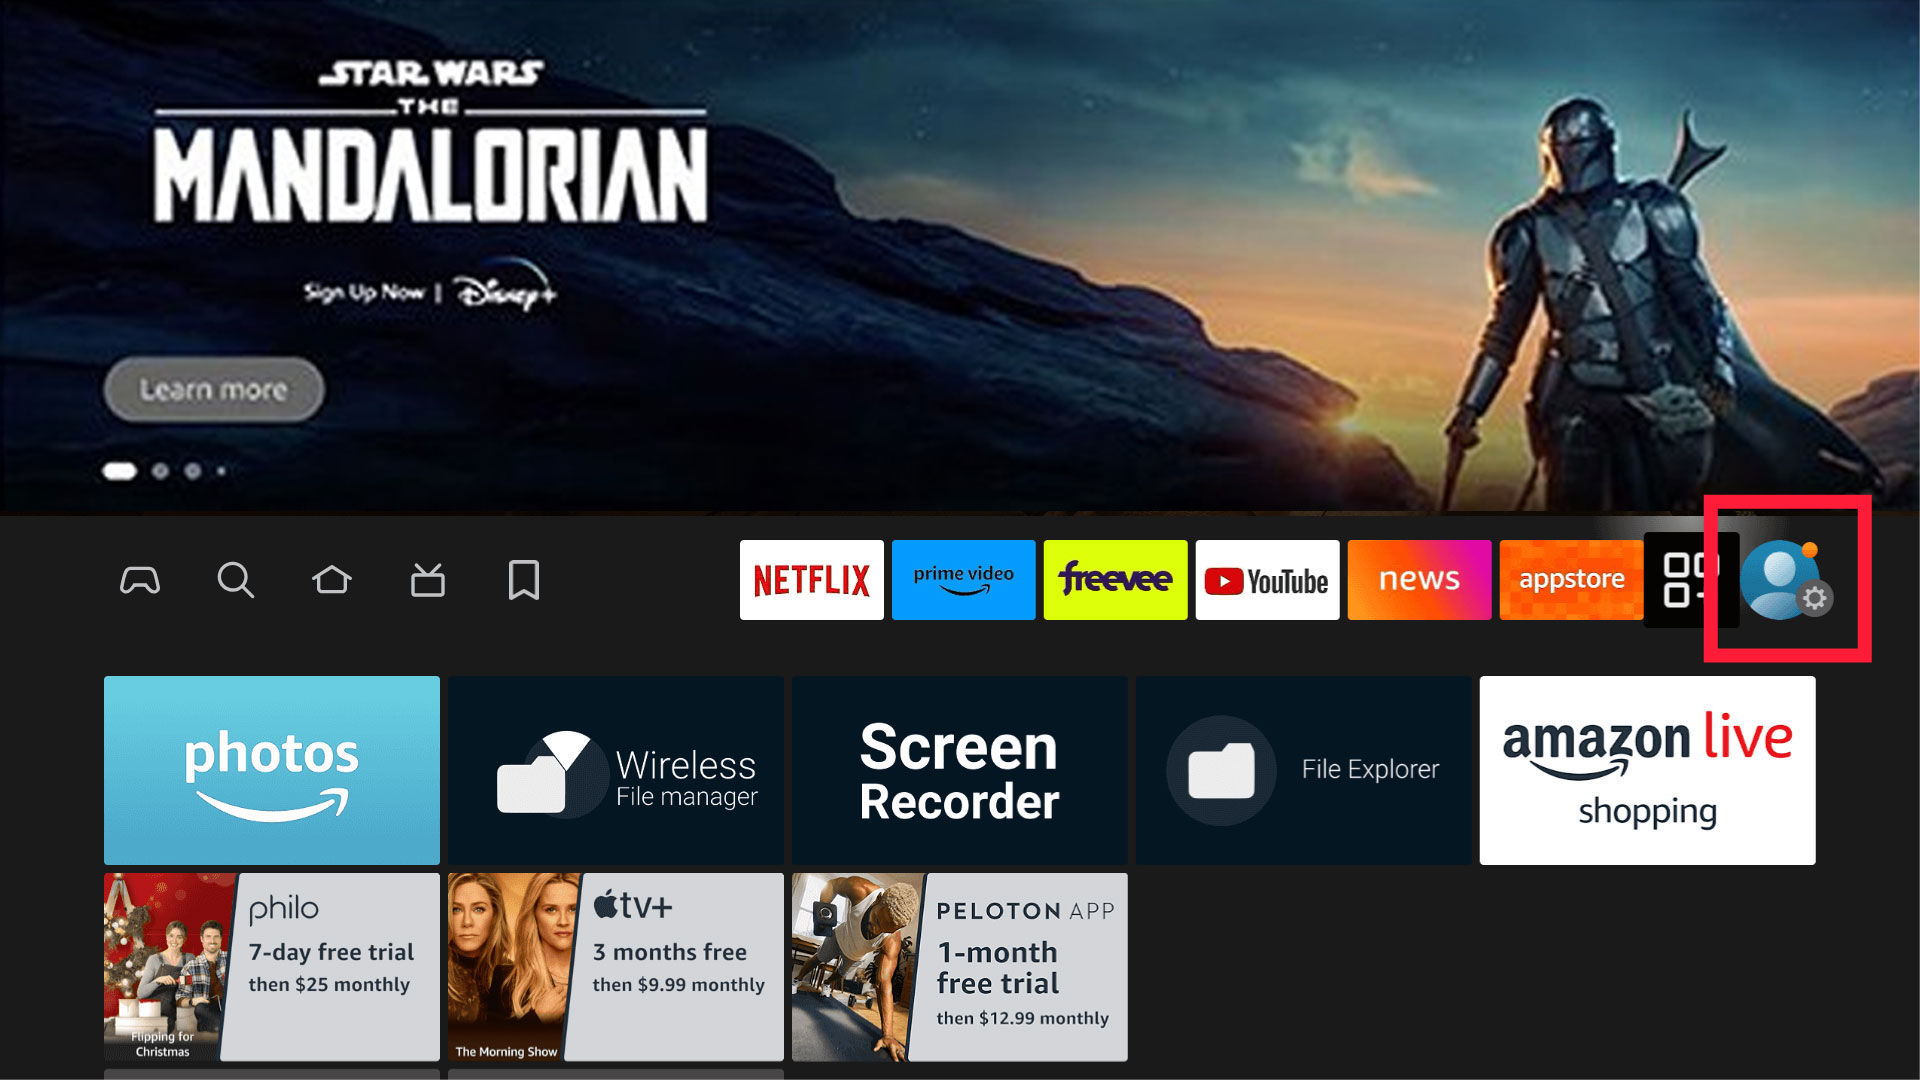 Application Icon on Homepage of Firestick